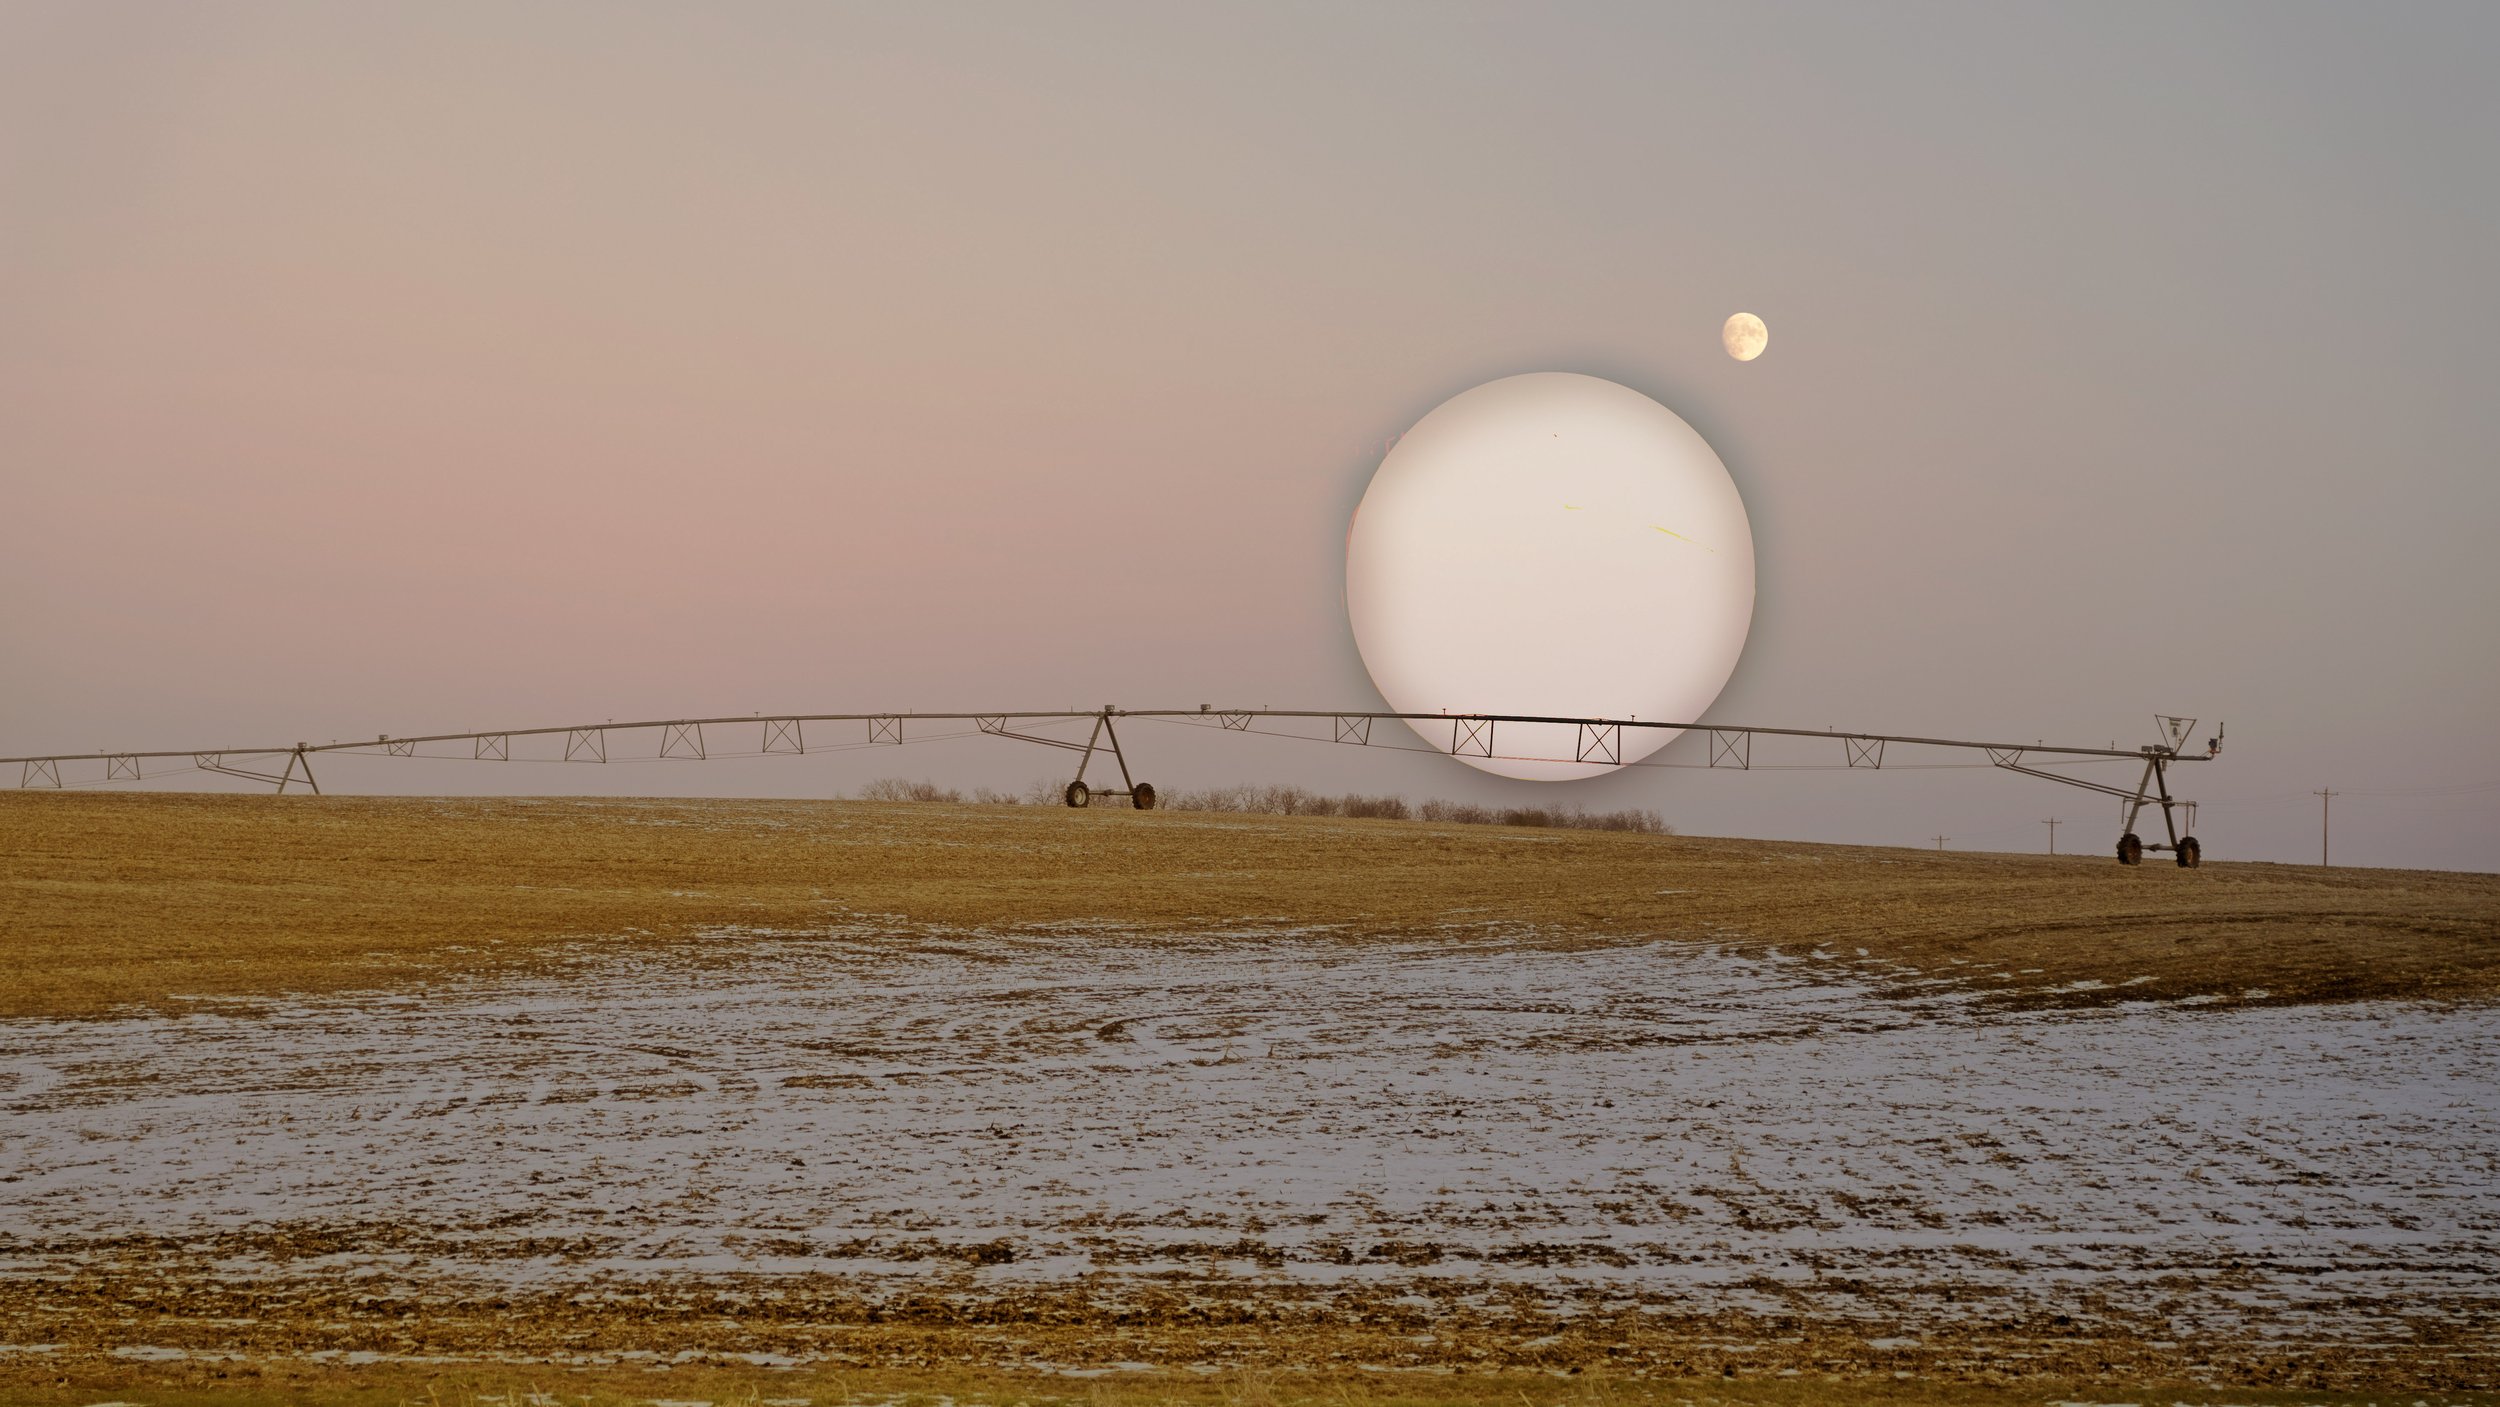 The Moon and Its Satellite Shine on the Wintry Cornfield.